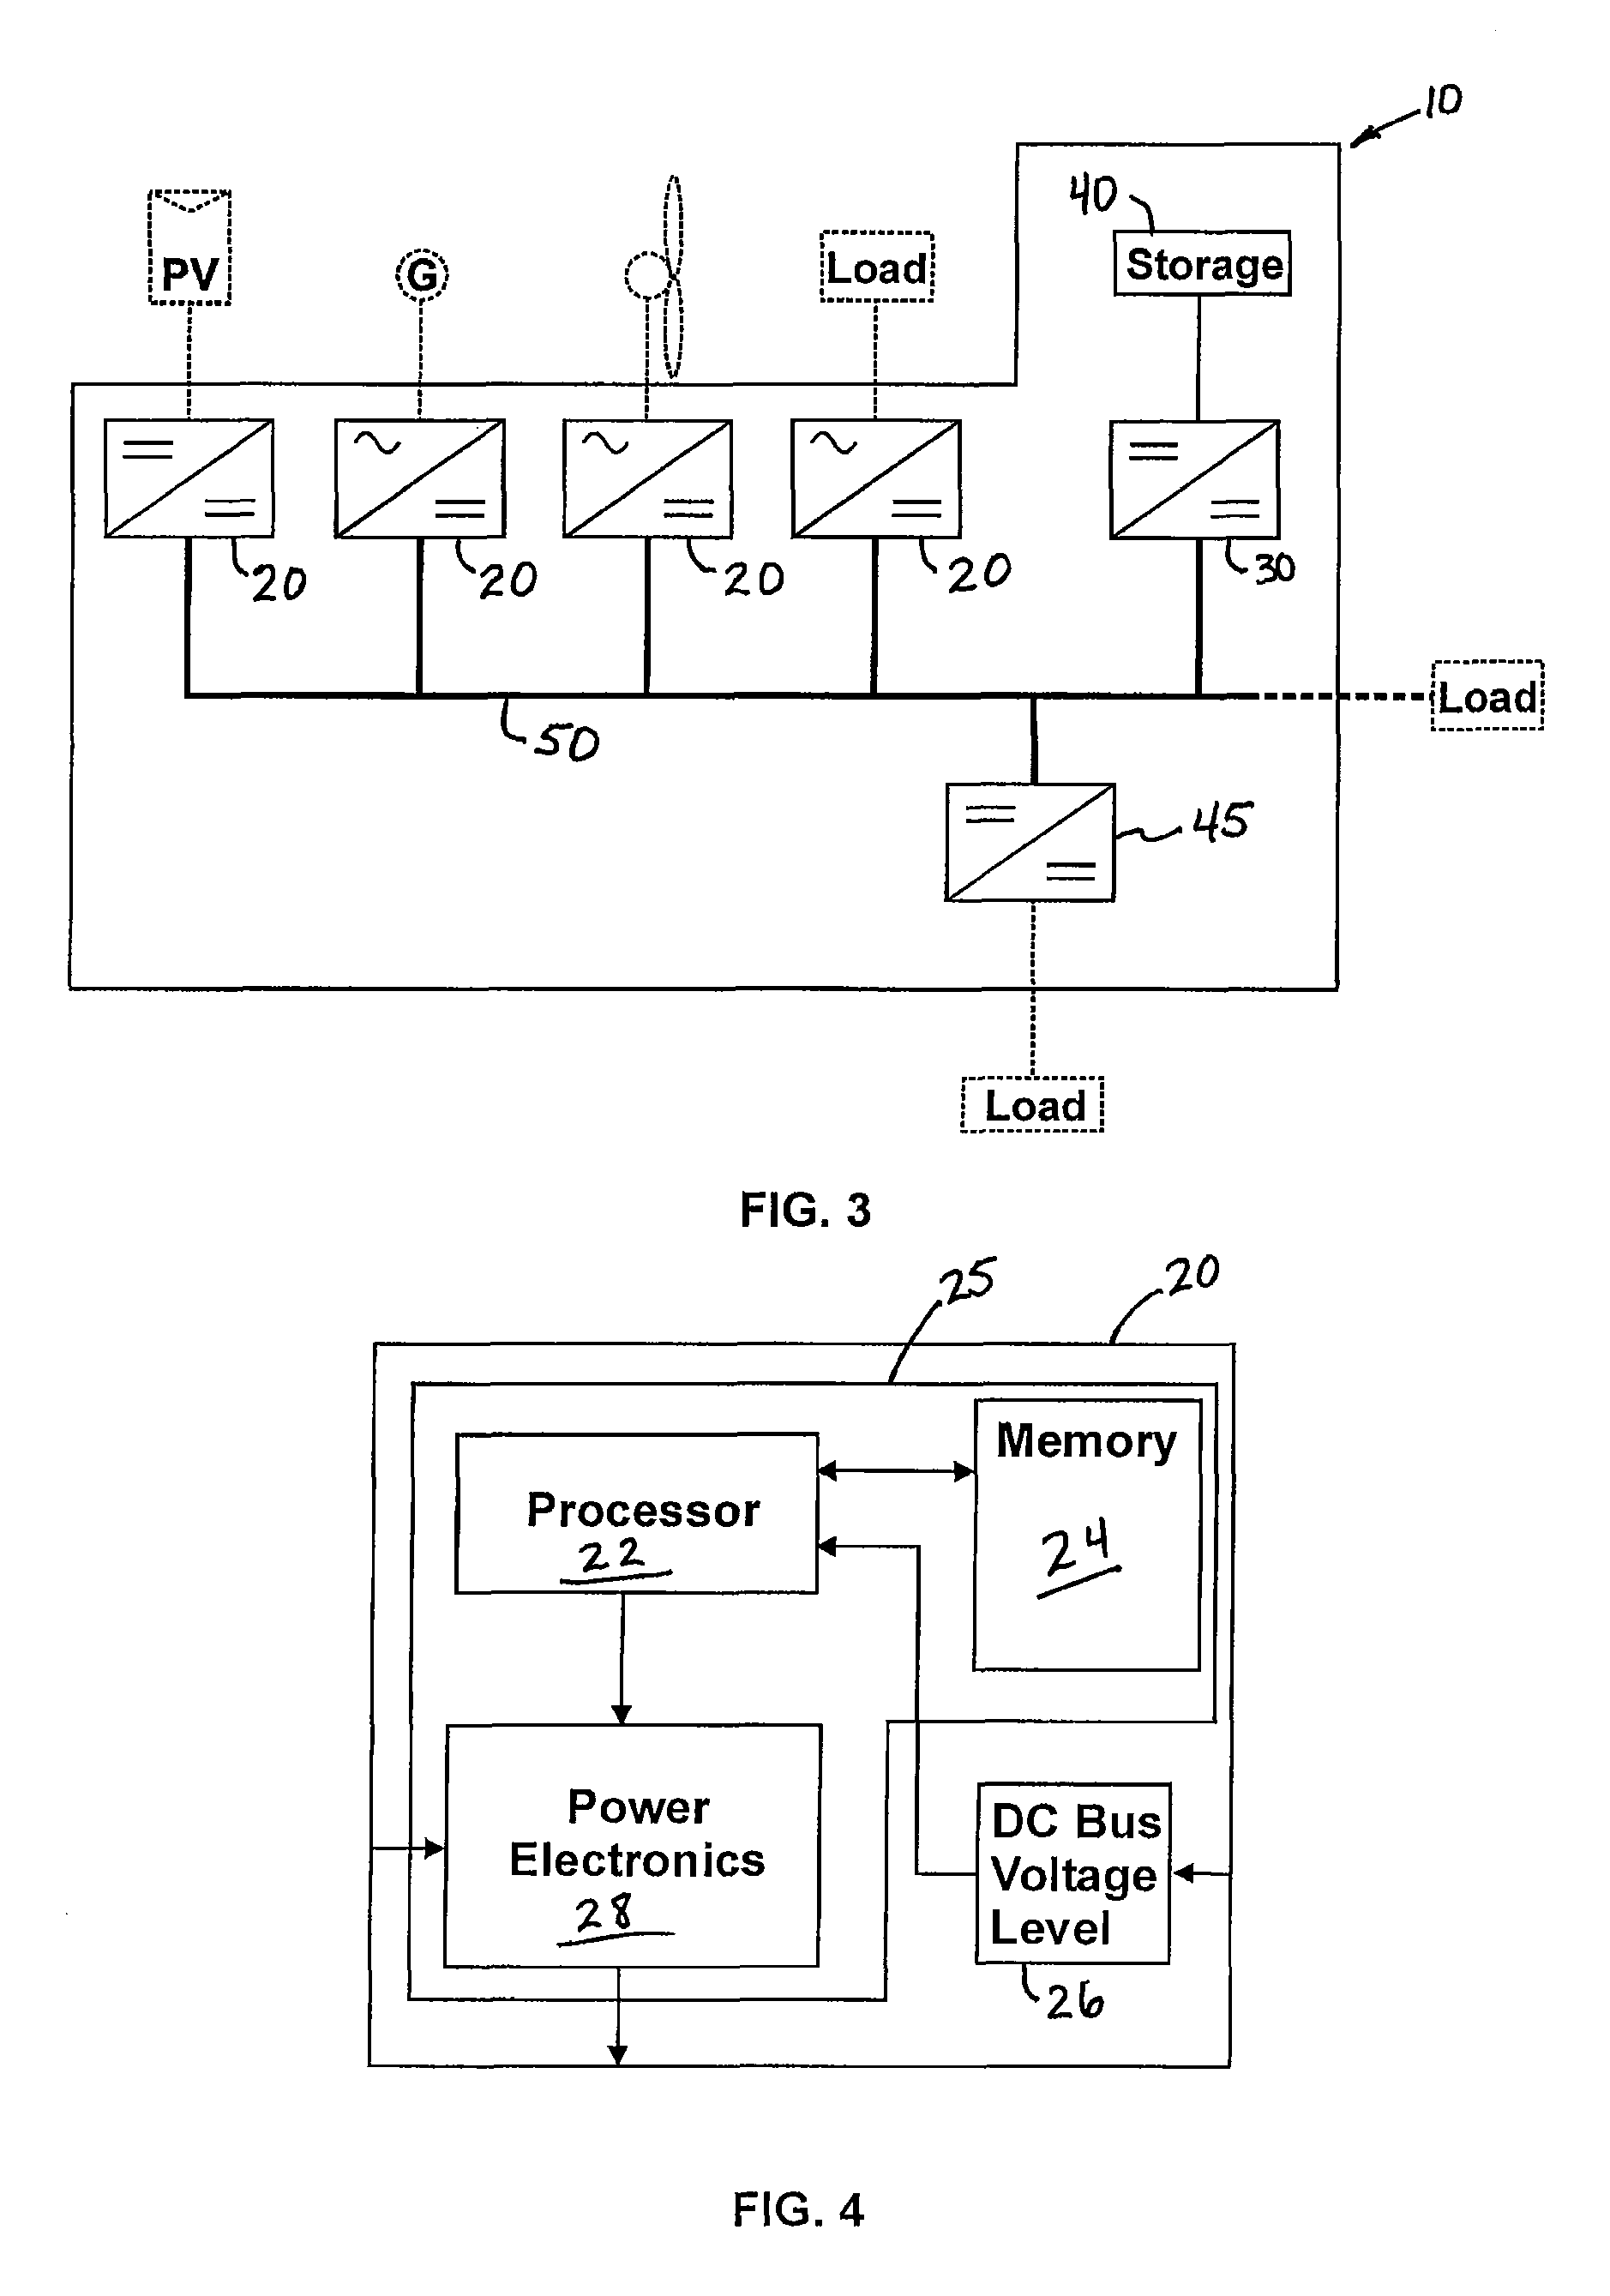 Method and apparatus for controlling a hybrid power system